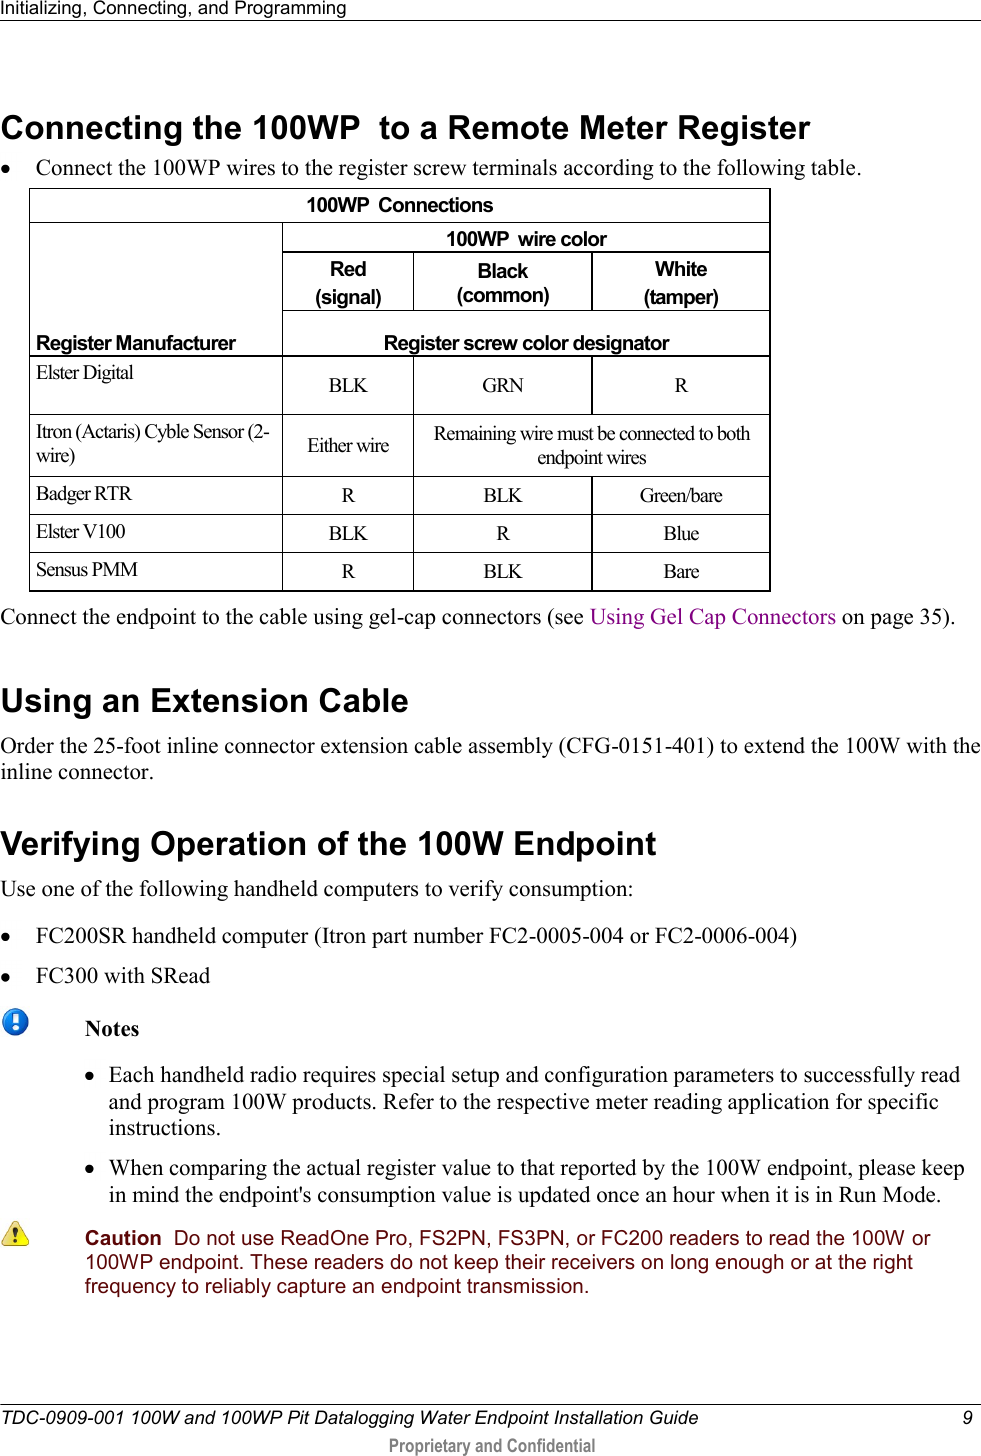 Initializing, Connecting, and Programming   TDC-0909-001 100W and 100WP Pit Datalogging Water Endpoint Installation Guide  9   Proprietary and Confidential     Connecting the 100WP  to a Remote Meter Register  Connect the 100WP wires to the register screw terminals according to the following table.  100WP  Connections     Register Manufacturer 100WP  wire color Red (signal) Black (common) White (tamper) Register screw color designator Elster Digital BLK GRN R Itron (Actaris) Cyble Sensor (2-wire) Either wire Remaining wire must be connected to both endpoint wires Badger RTR R BLK Green/bare Elster V100 BLK R Blue Sensus PMM R BLK Bare Connect the endpoint to the cable using gel-cap connectors (see Using Gel Cap Connectors on page 35).   Using an Extension Cable Order the 25-foot inline connector extension cable assembly (CFG-0151-401) to extend the 100W with the inline connector.    Verifying Operation of the 100W Endpoint Use one of the following handheld computers to verify consumption:  FC200SR handheld computer (Itron part number FC2-0005-004 or FC2-0006-004)  FC300 with SRead   Notes  Each handheld radio requires special setup and configuration parameters to successfully read and program 100W products. Refer to the respective meter reading application for specific instructions.  When comparing the actual register value to that reported by the 100W endpoint, please keep in mind the endpoint&apos;s consumption value is updated once an hour when it is in Run Mode.   Caution  Do not use ReadOne Pro, FS2PN, FS3PN, or FC200 readers to read the 100W or 100WP endpoint. These readers do not keep their receivers on long enough or at the right frequency to reliably capture an endpoint transmission.    